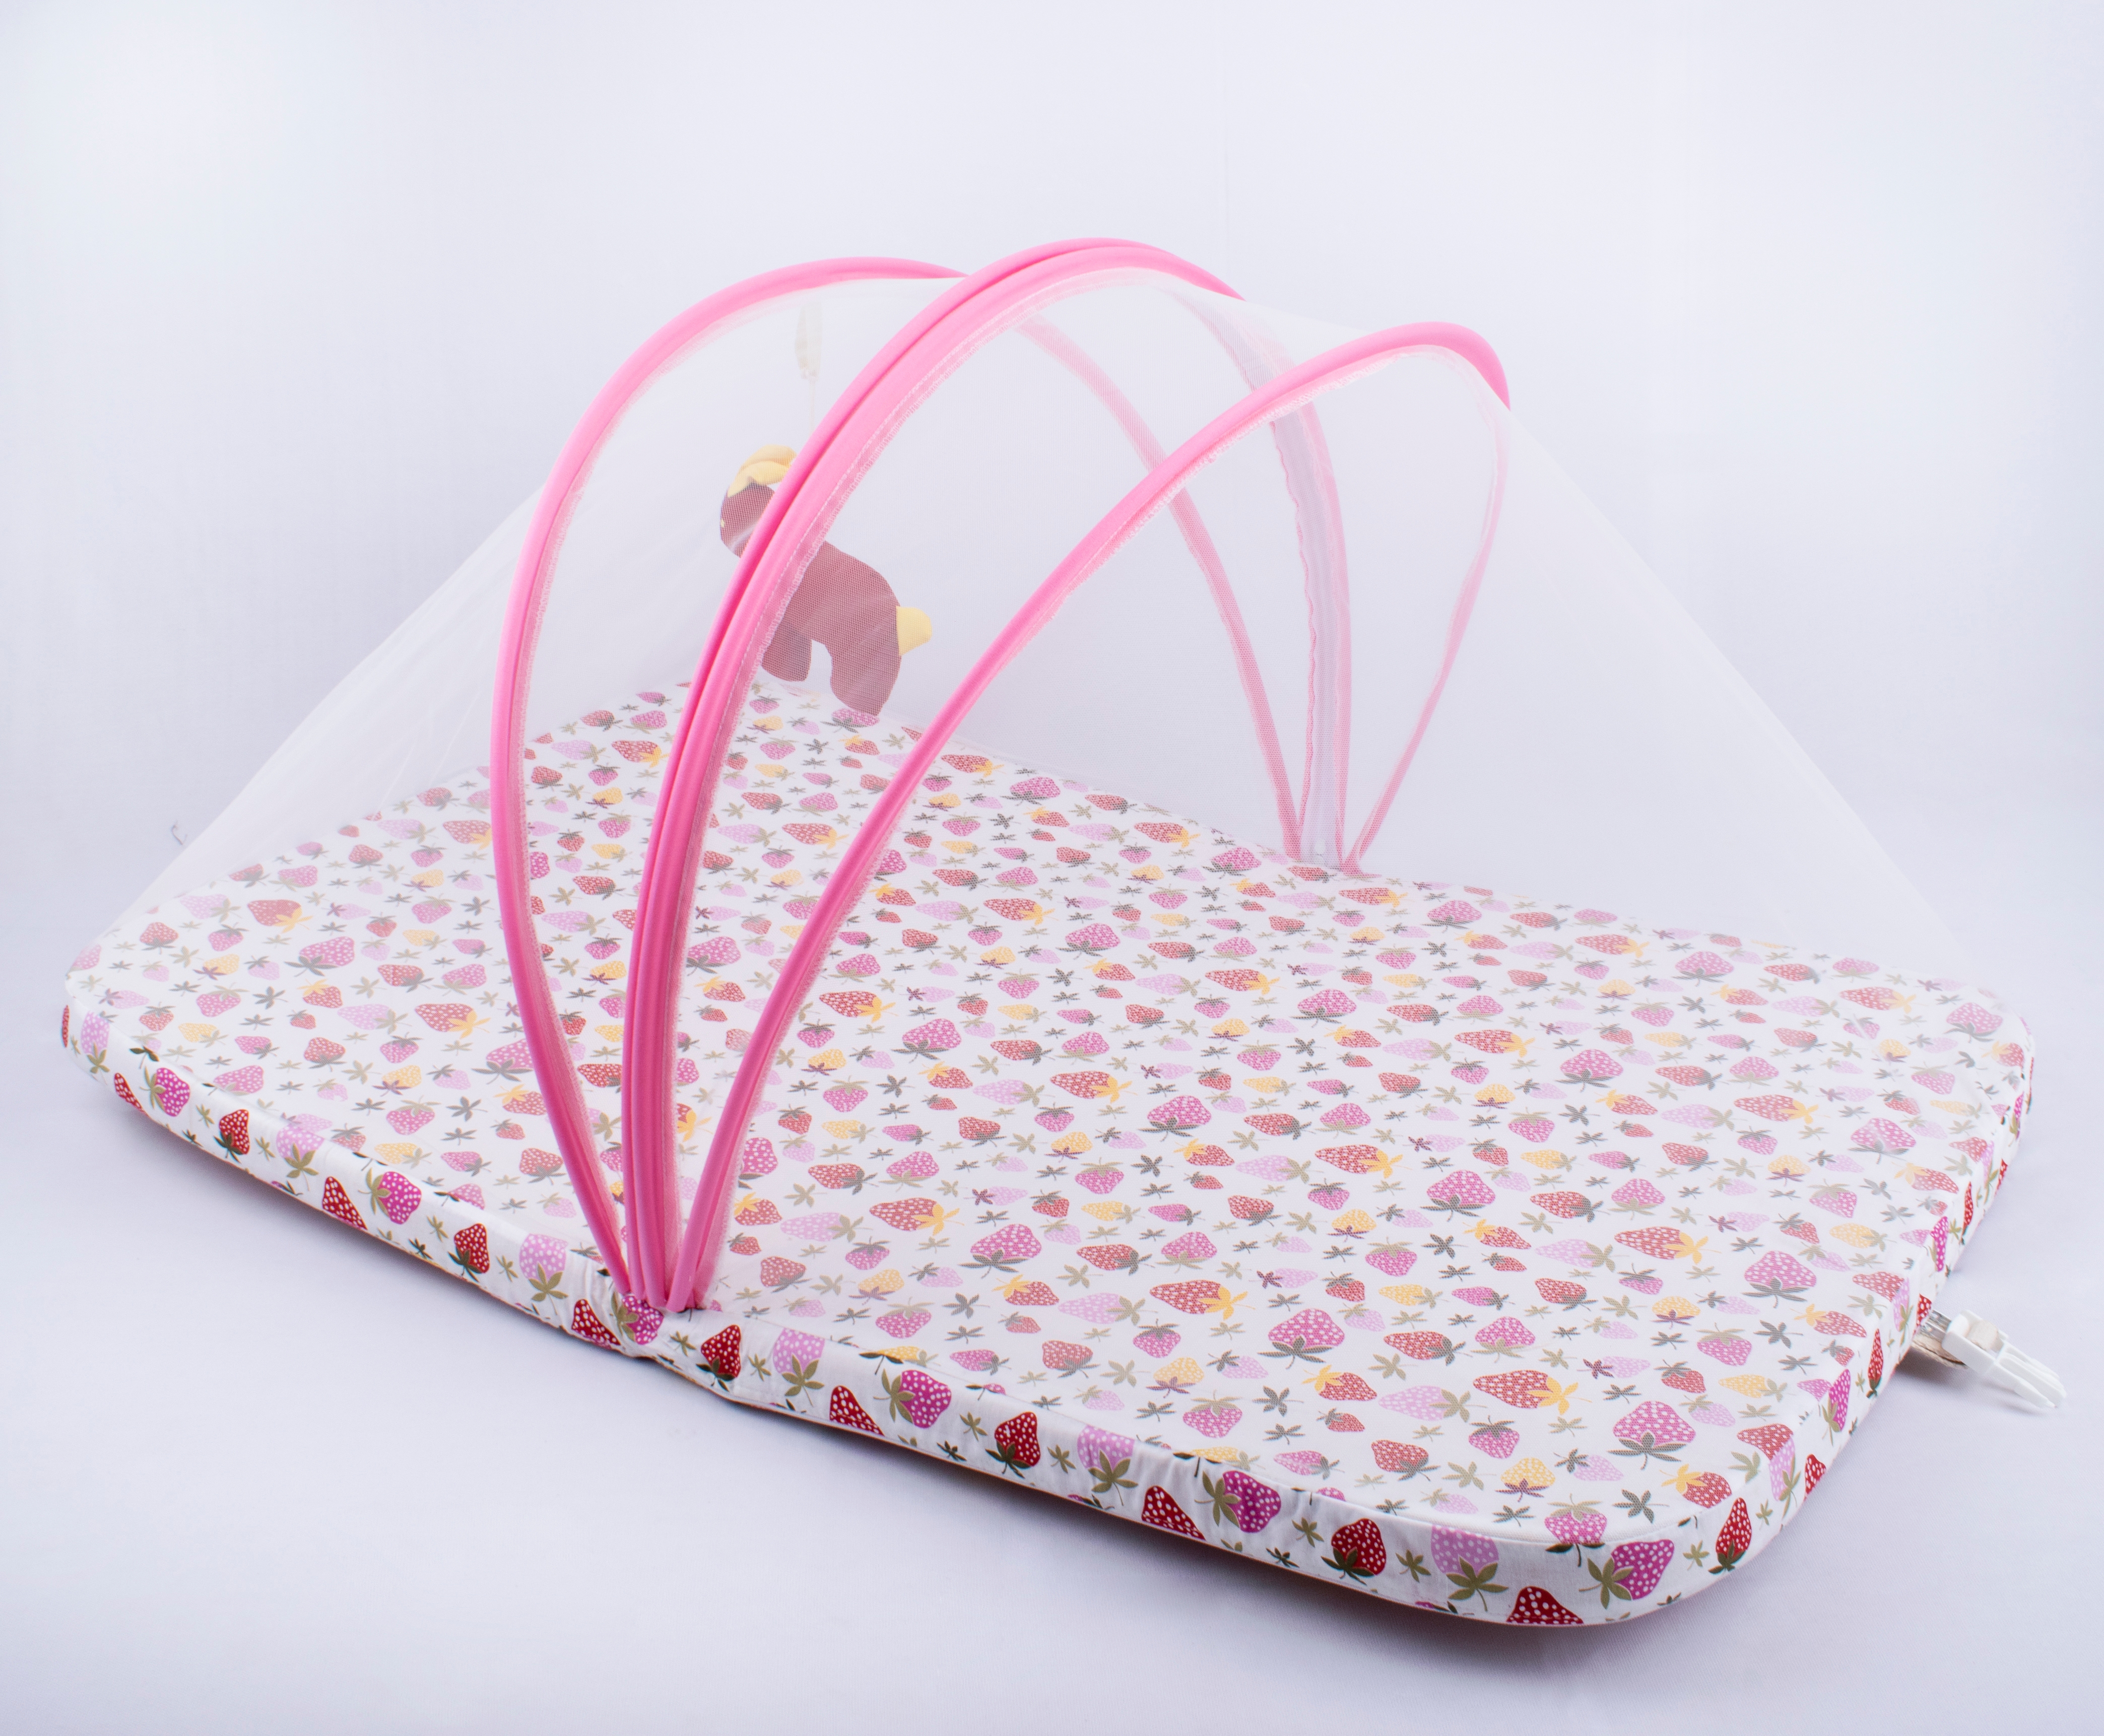 Blooming Buds | Blooming Buds Mattress with Net and Hanging Toy - Ice Cream Print